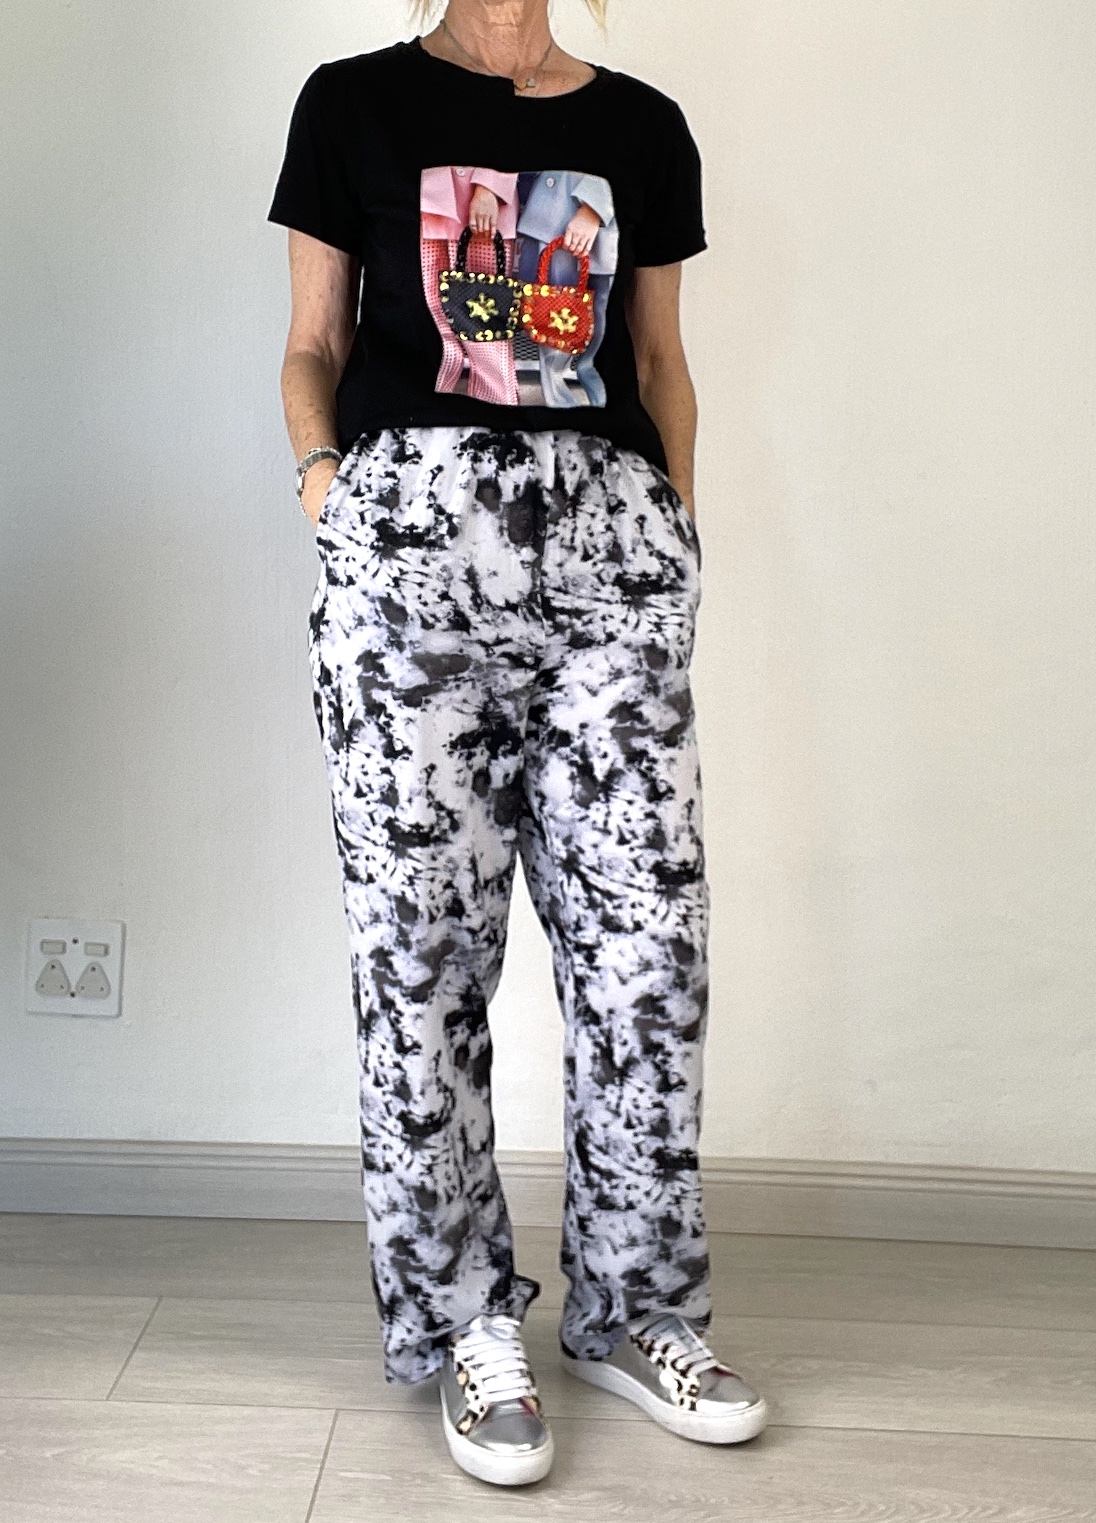 Luna pants with black t with handbags